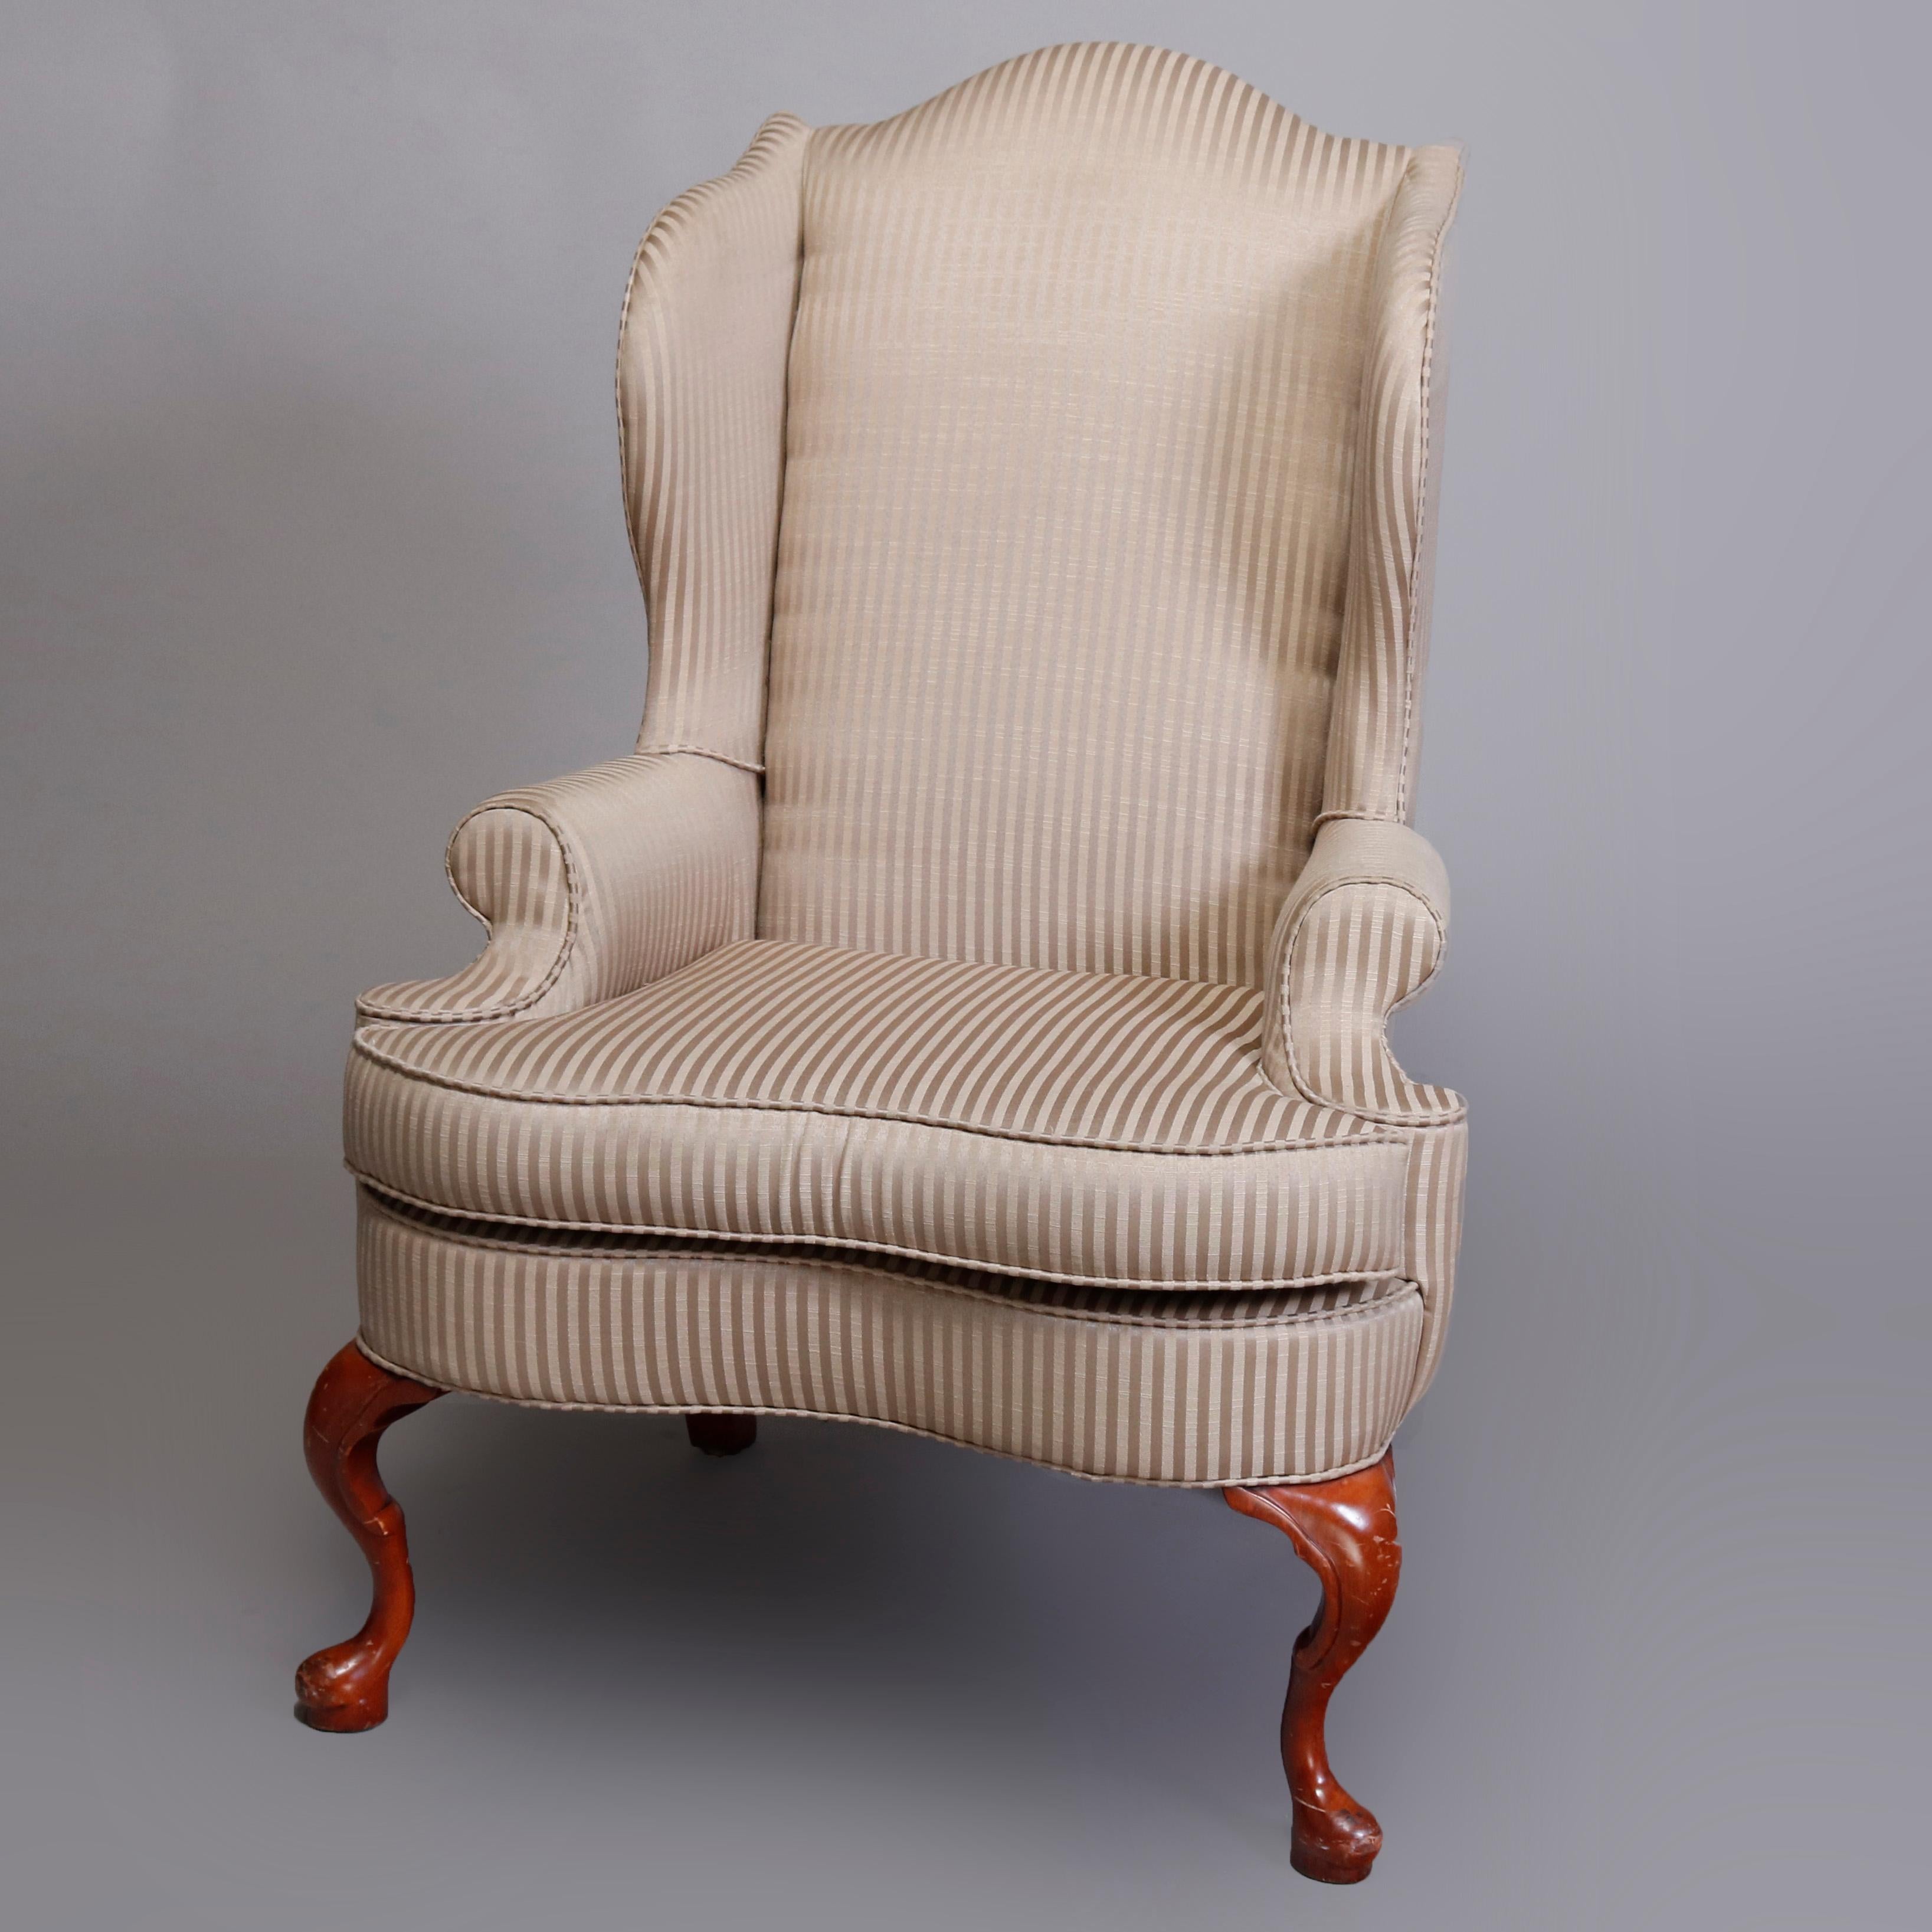 A pair of Queen Anne style fireside chairs offer wingback form upholstered with striped patterned fabric and having scrolled arms and shaped seat surmounting carved mahogany cabriole legs with pad feet, 20th century

Measures: 48